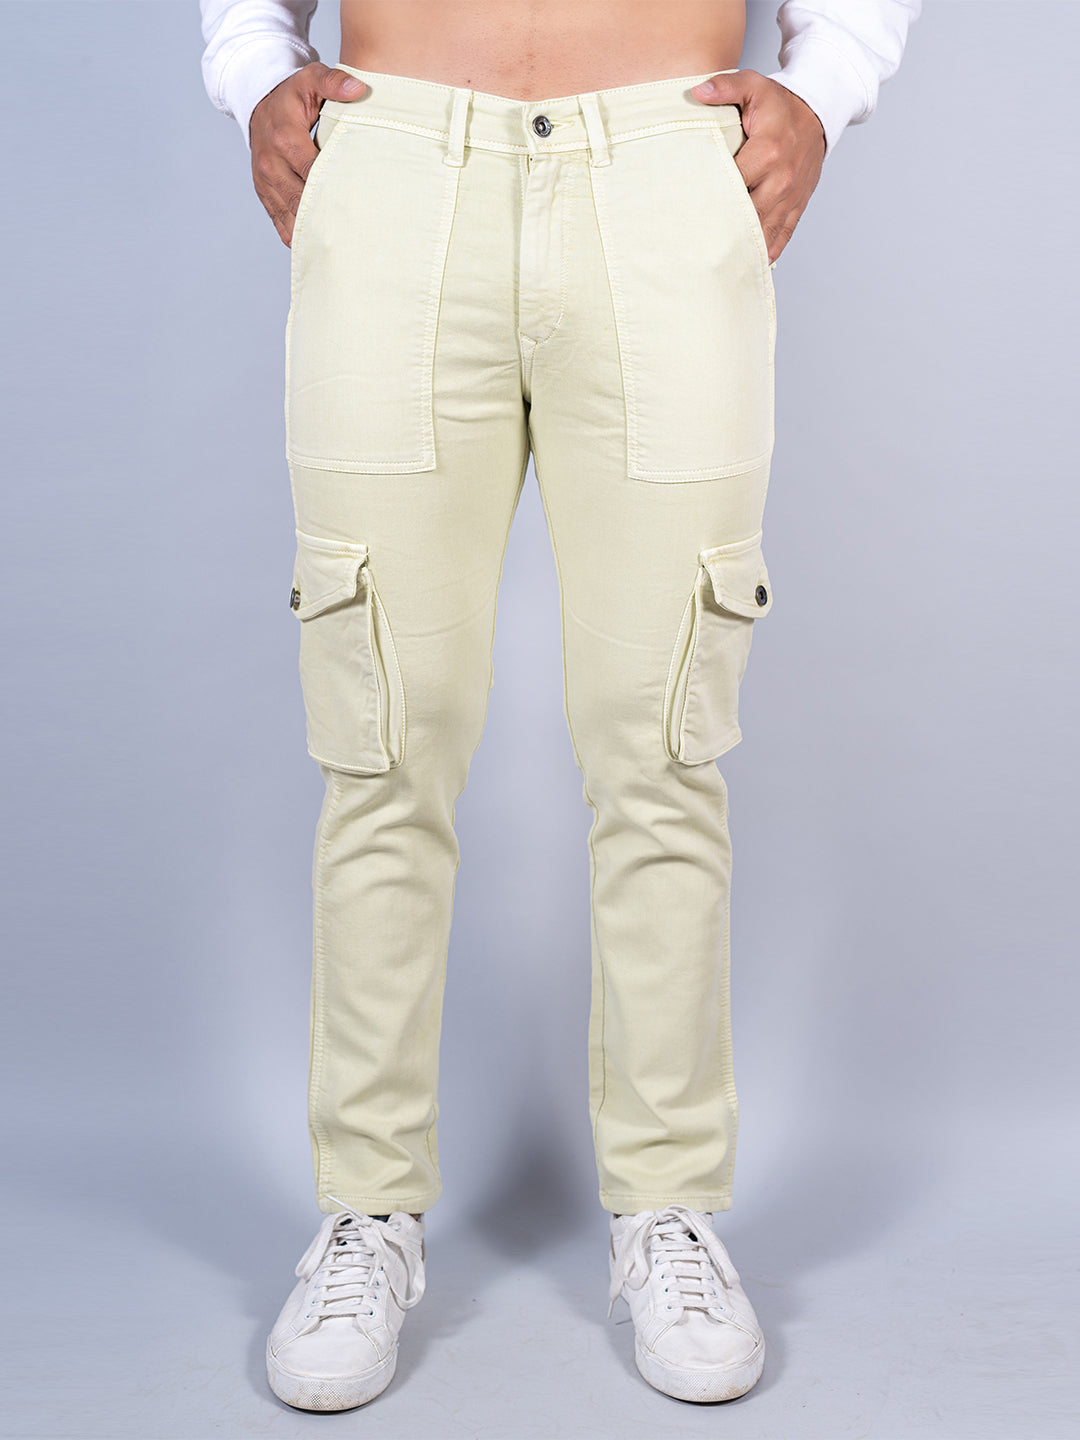 Buy Grey Trousers & Pants for Men by SNITCH Online | Ajio.com